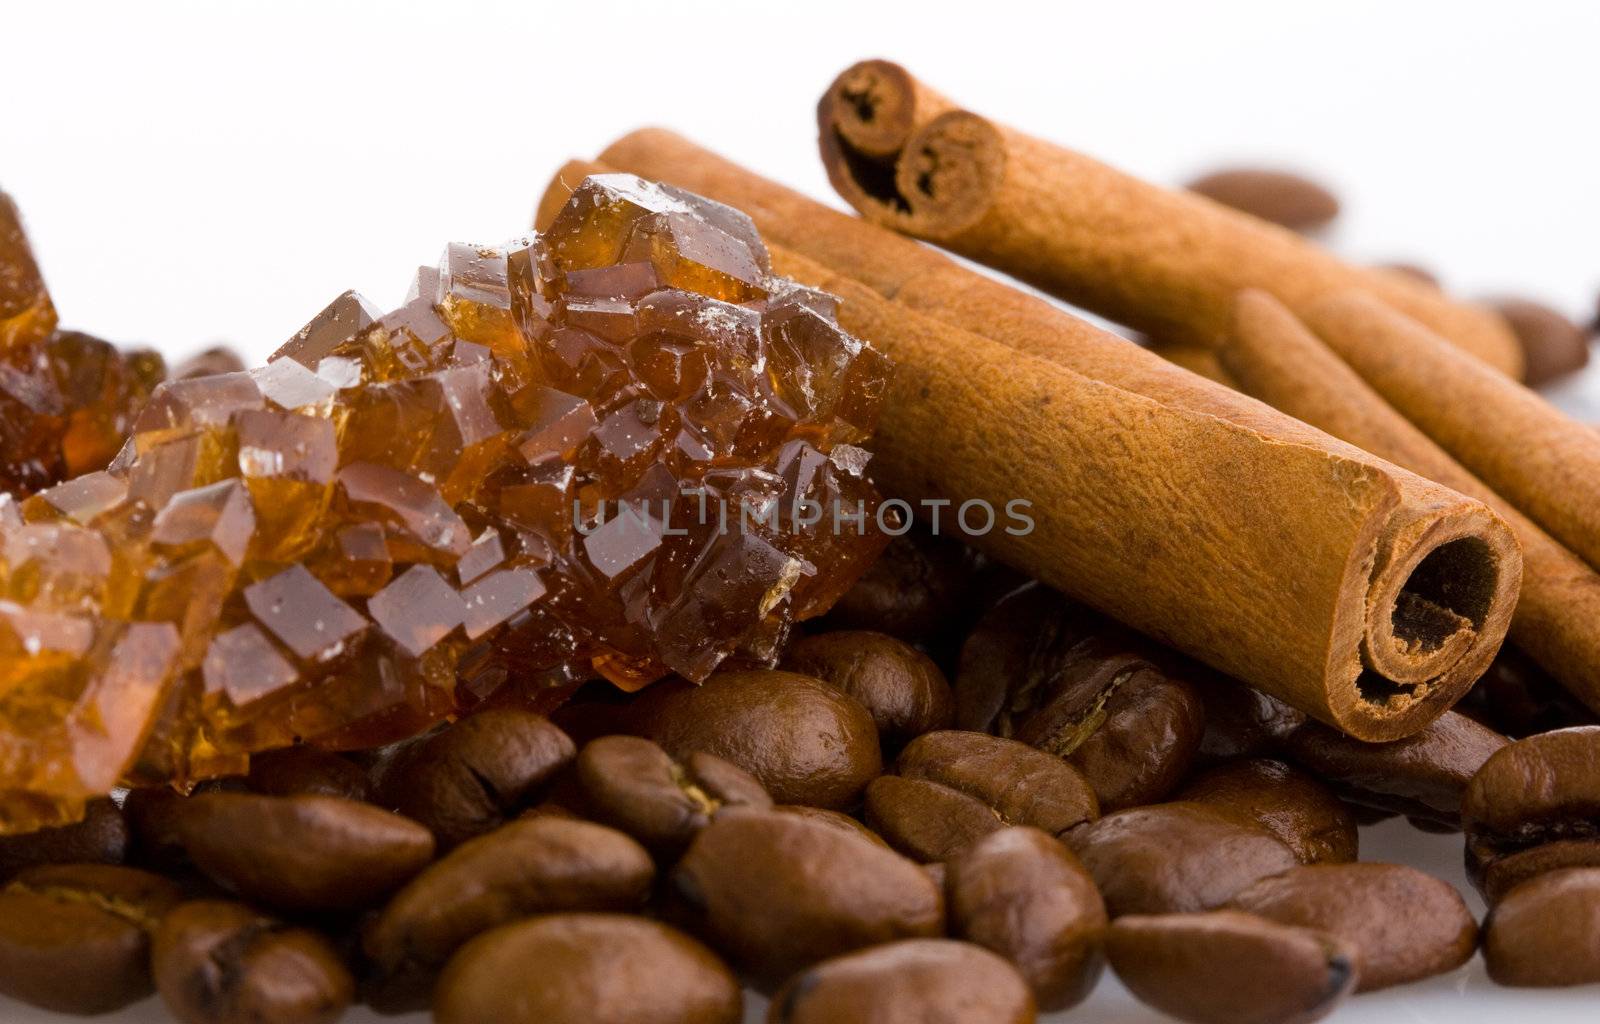 Coffee beans, cinnamon and sugar crystals by mihhailov